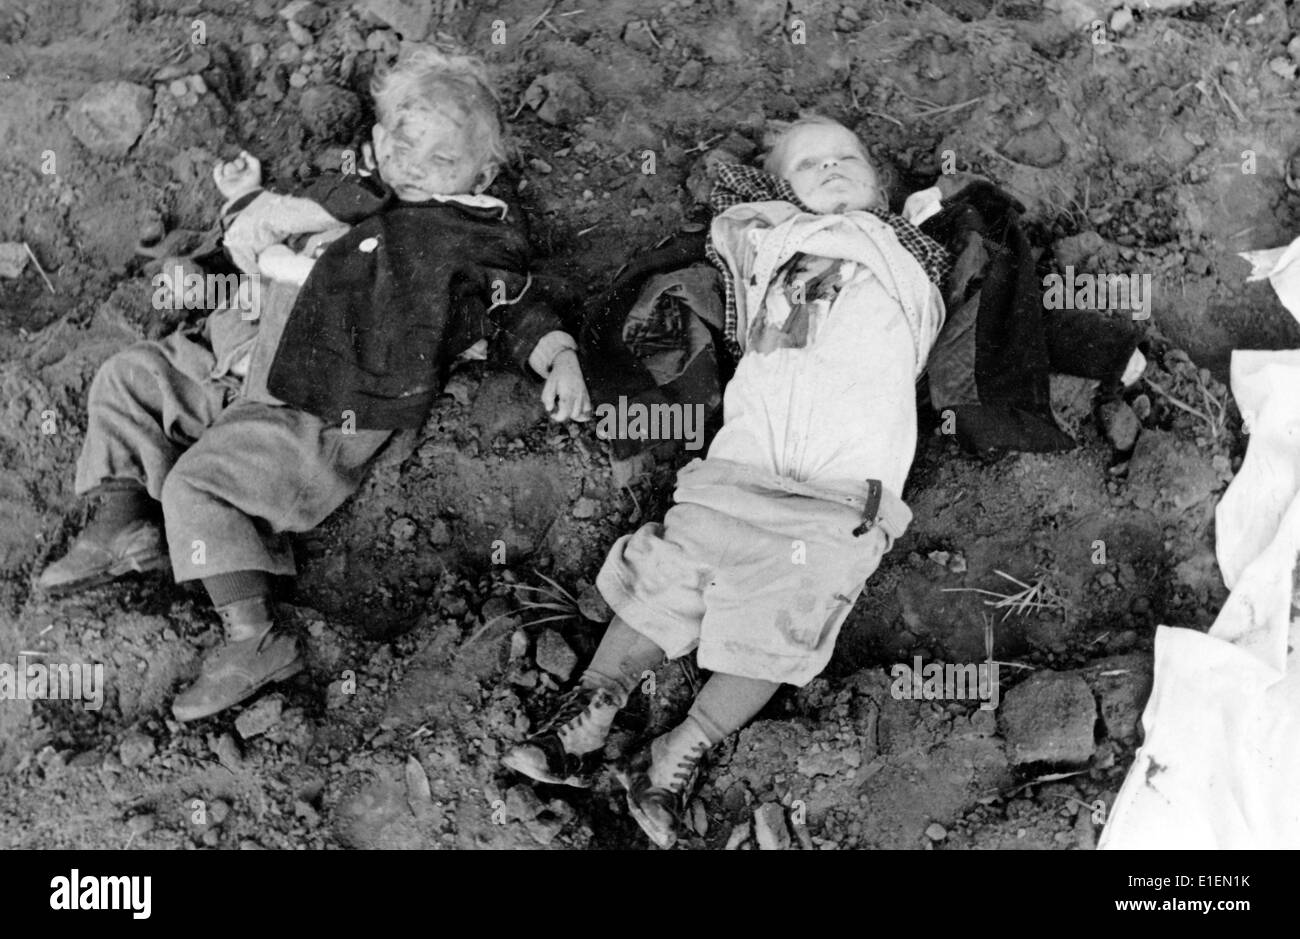 The Nazi Propaganda image shows two children killed in the Nemmersdorf massacre in Nemmersdorf (today Mayakovskoye, Russia) in October 1944. The Nemmersdorf massacre took place on 21 October 1944 in the then German village Nemmersdorf. According to current findings up to 30 people were killed as the Red Army advanced into the town. Even today the circumstances are still unclear. A translation of the German original Nazi news report on the back of the image reads: Soviet crimes in re-liberated East Prussian towns! As the report by the Supreme Command of the Armed Forces (OKW) says, German count Stock Photo